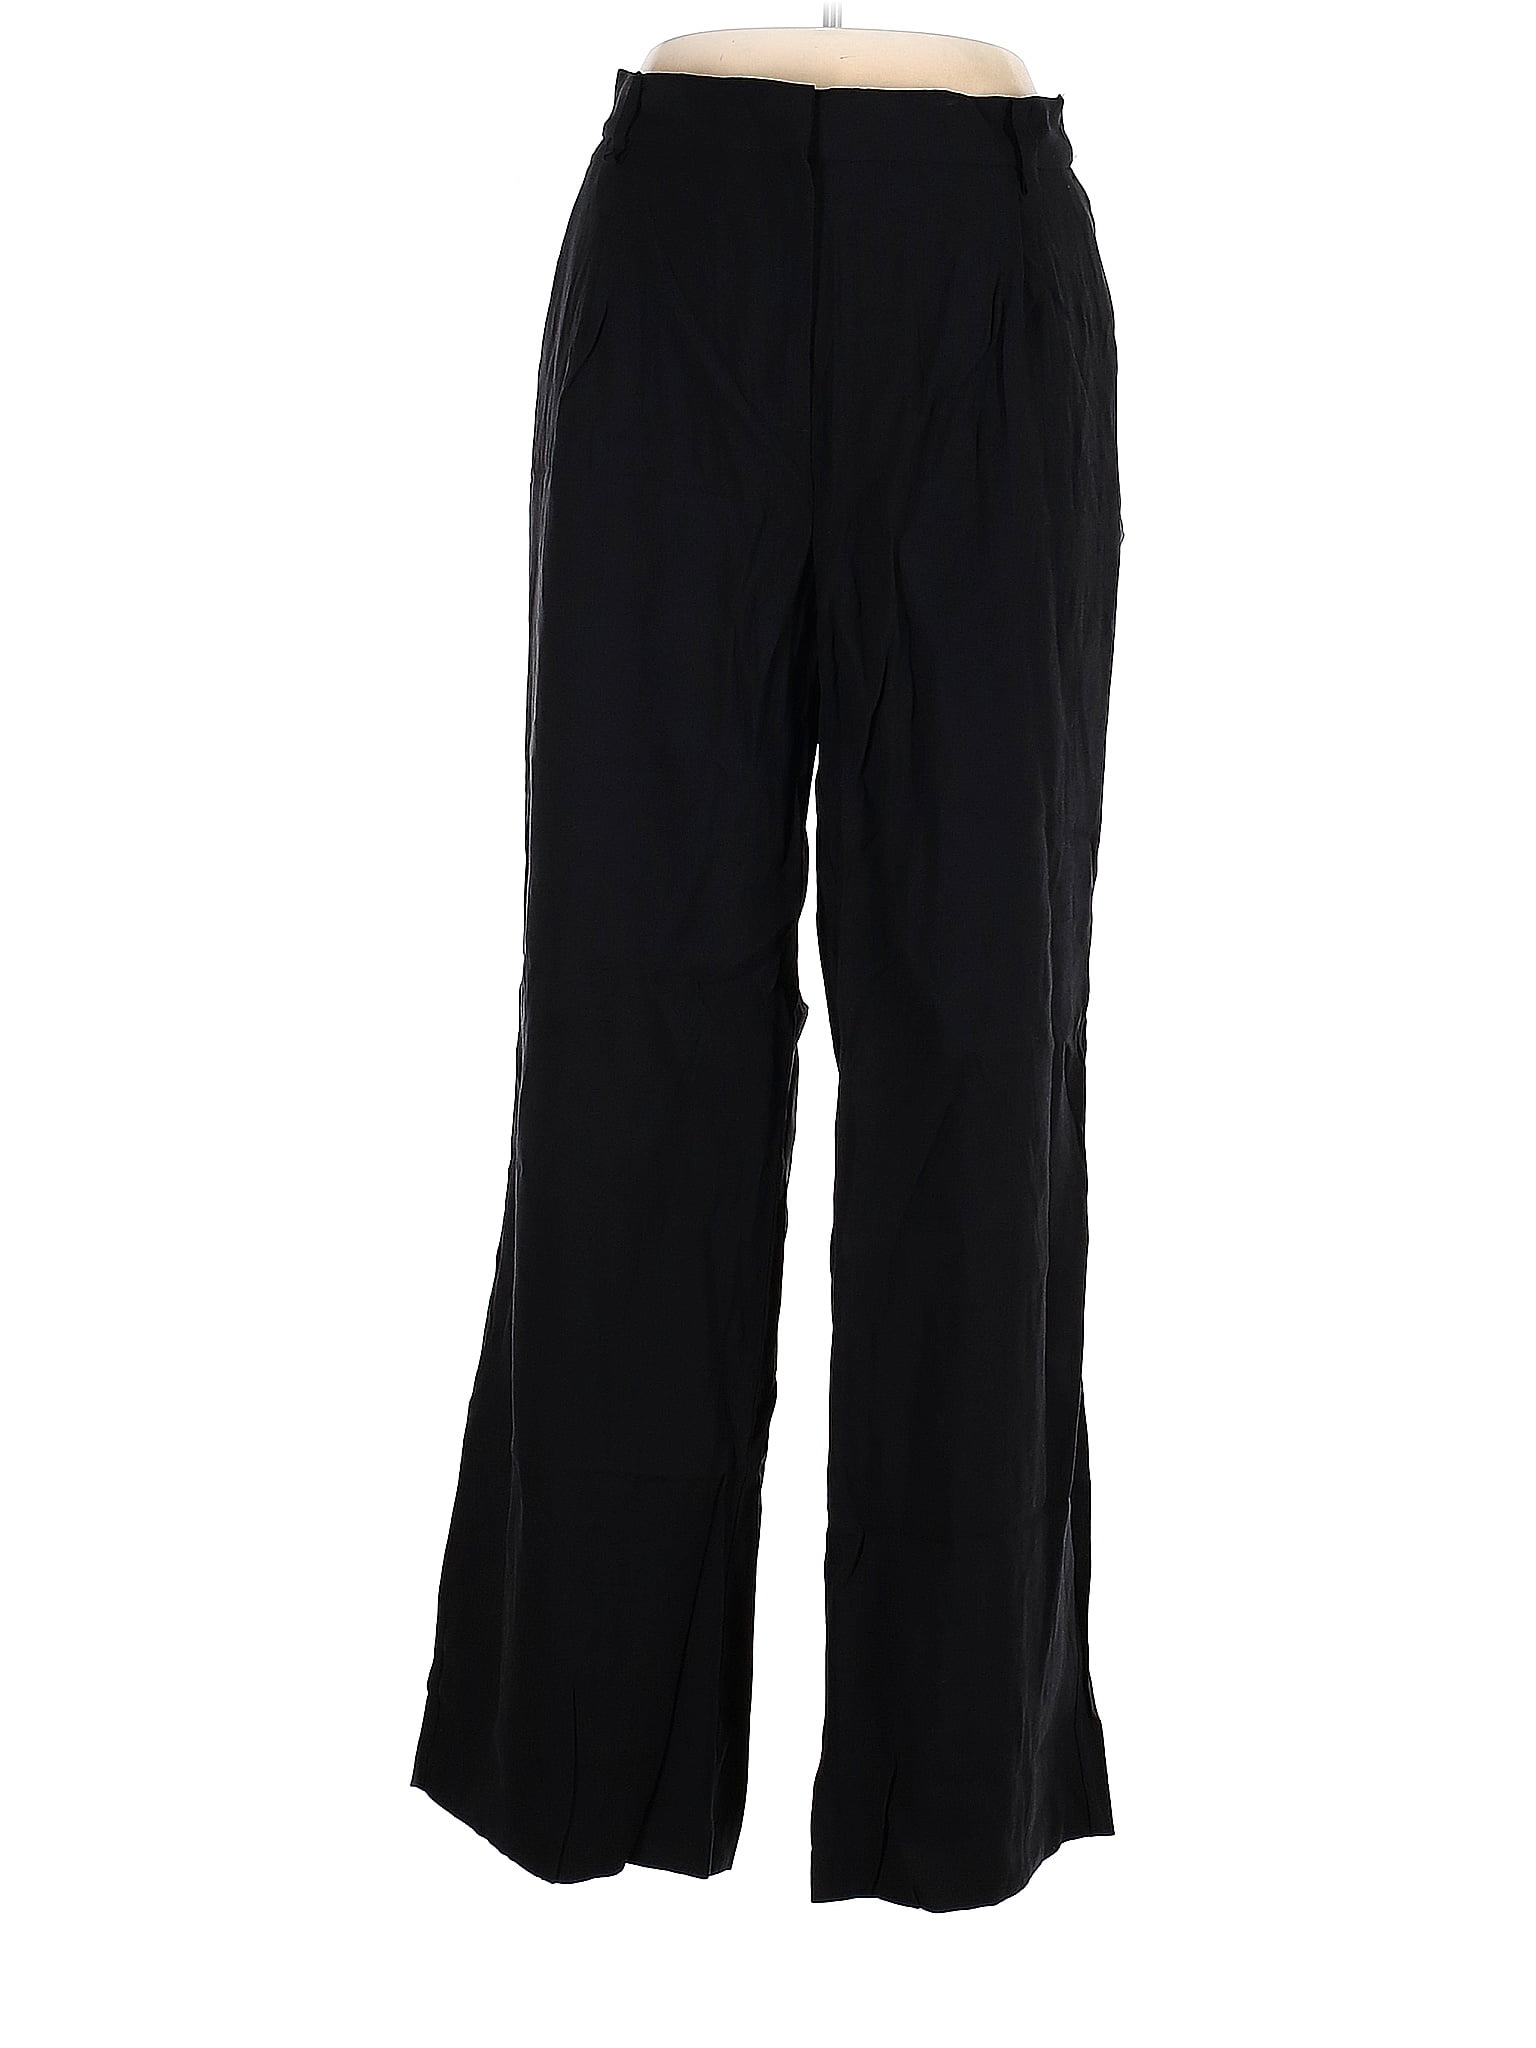 Splendid 100% Rayon Solid Black Casual Pants Size M - 75% off